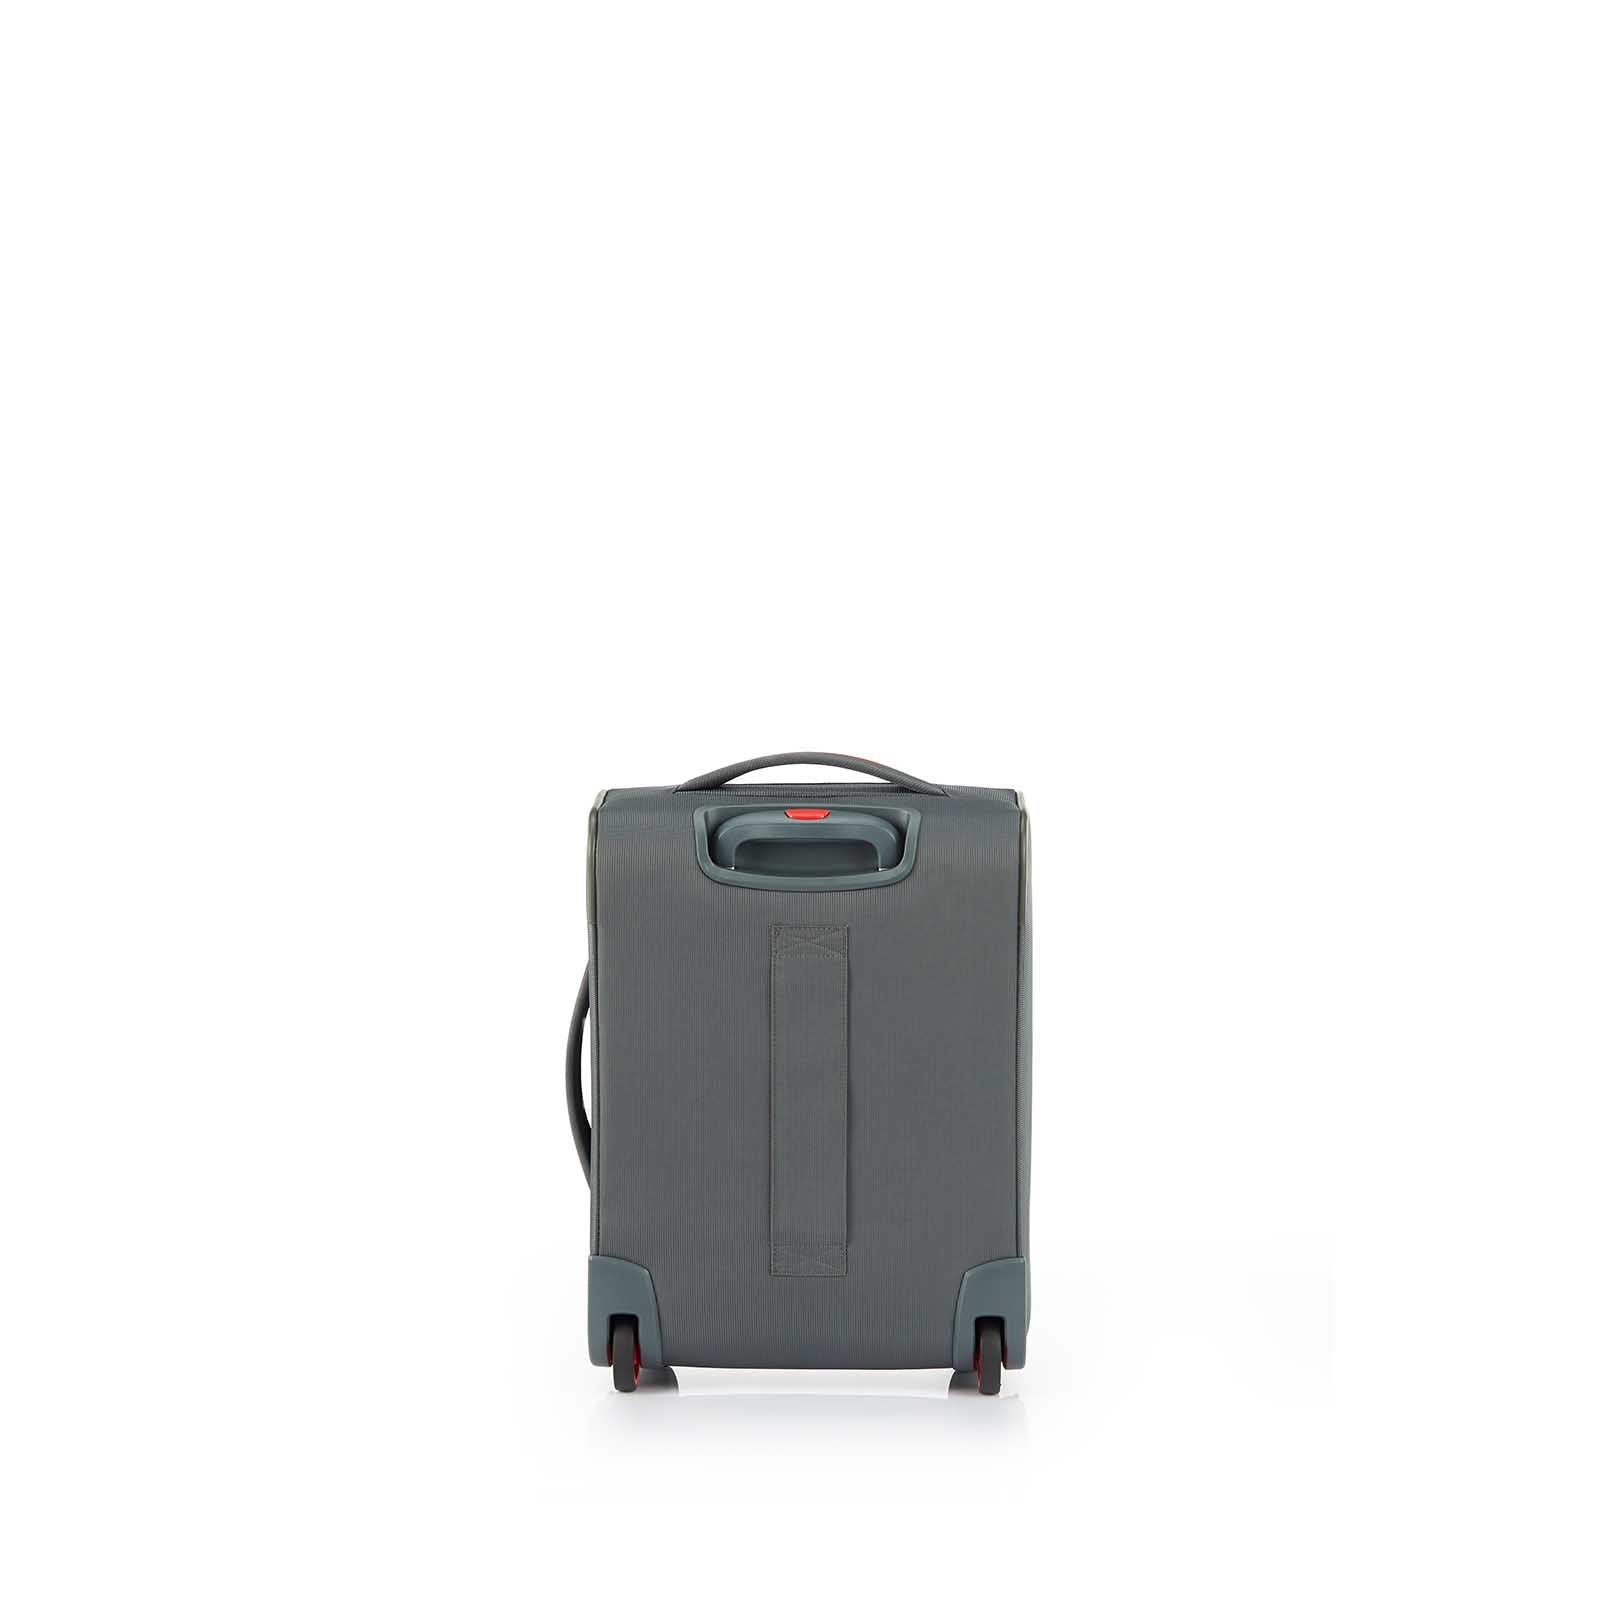 American-Tourister-Applite-4-Eco-50cm-Carry-On-Suitcase-Grey-Red-Smart-Sleeve